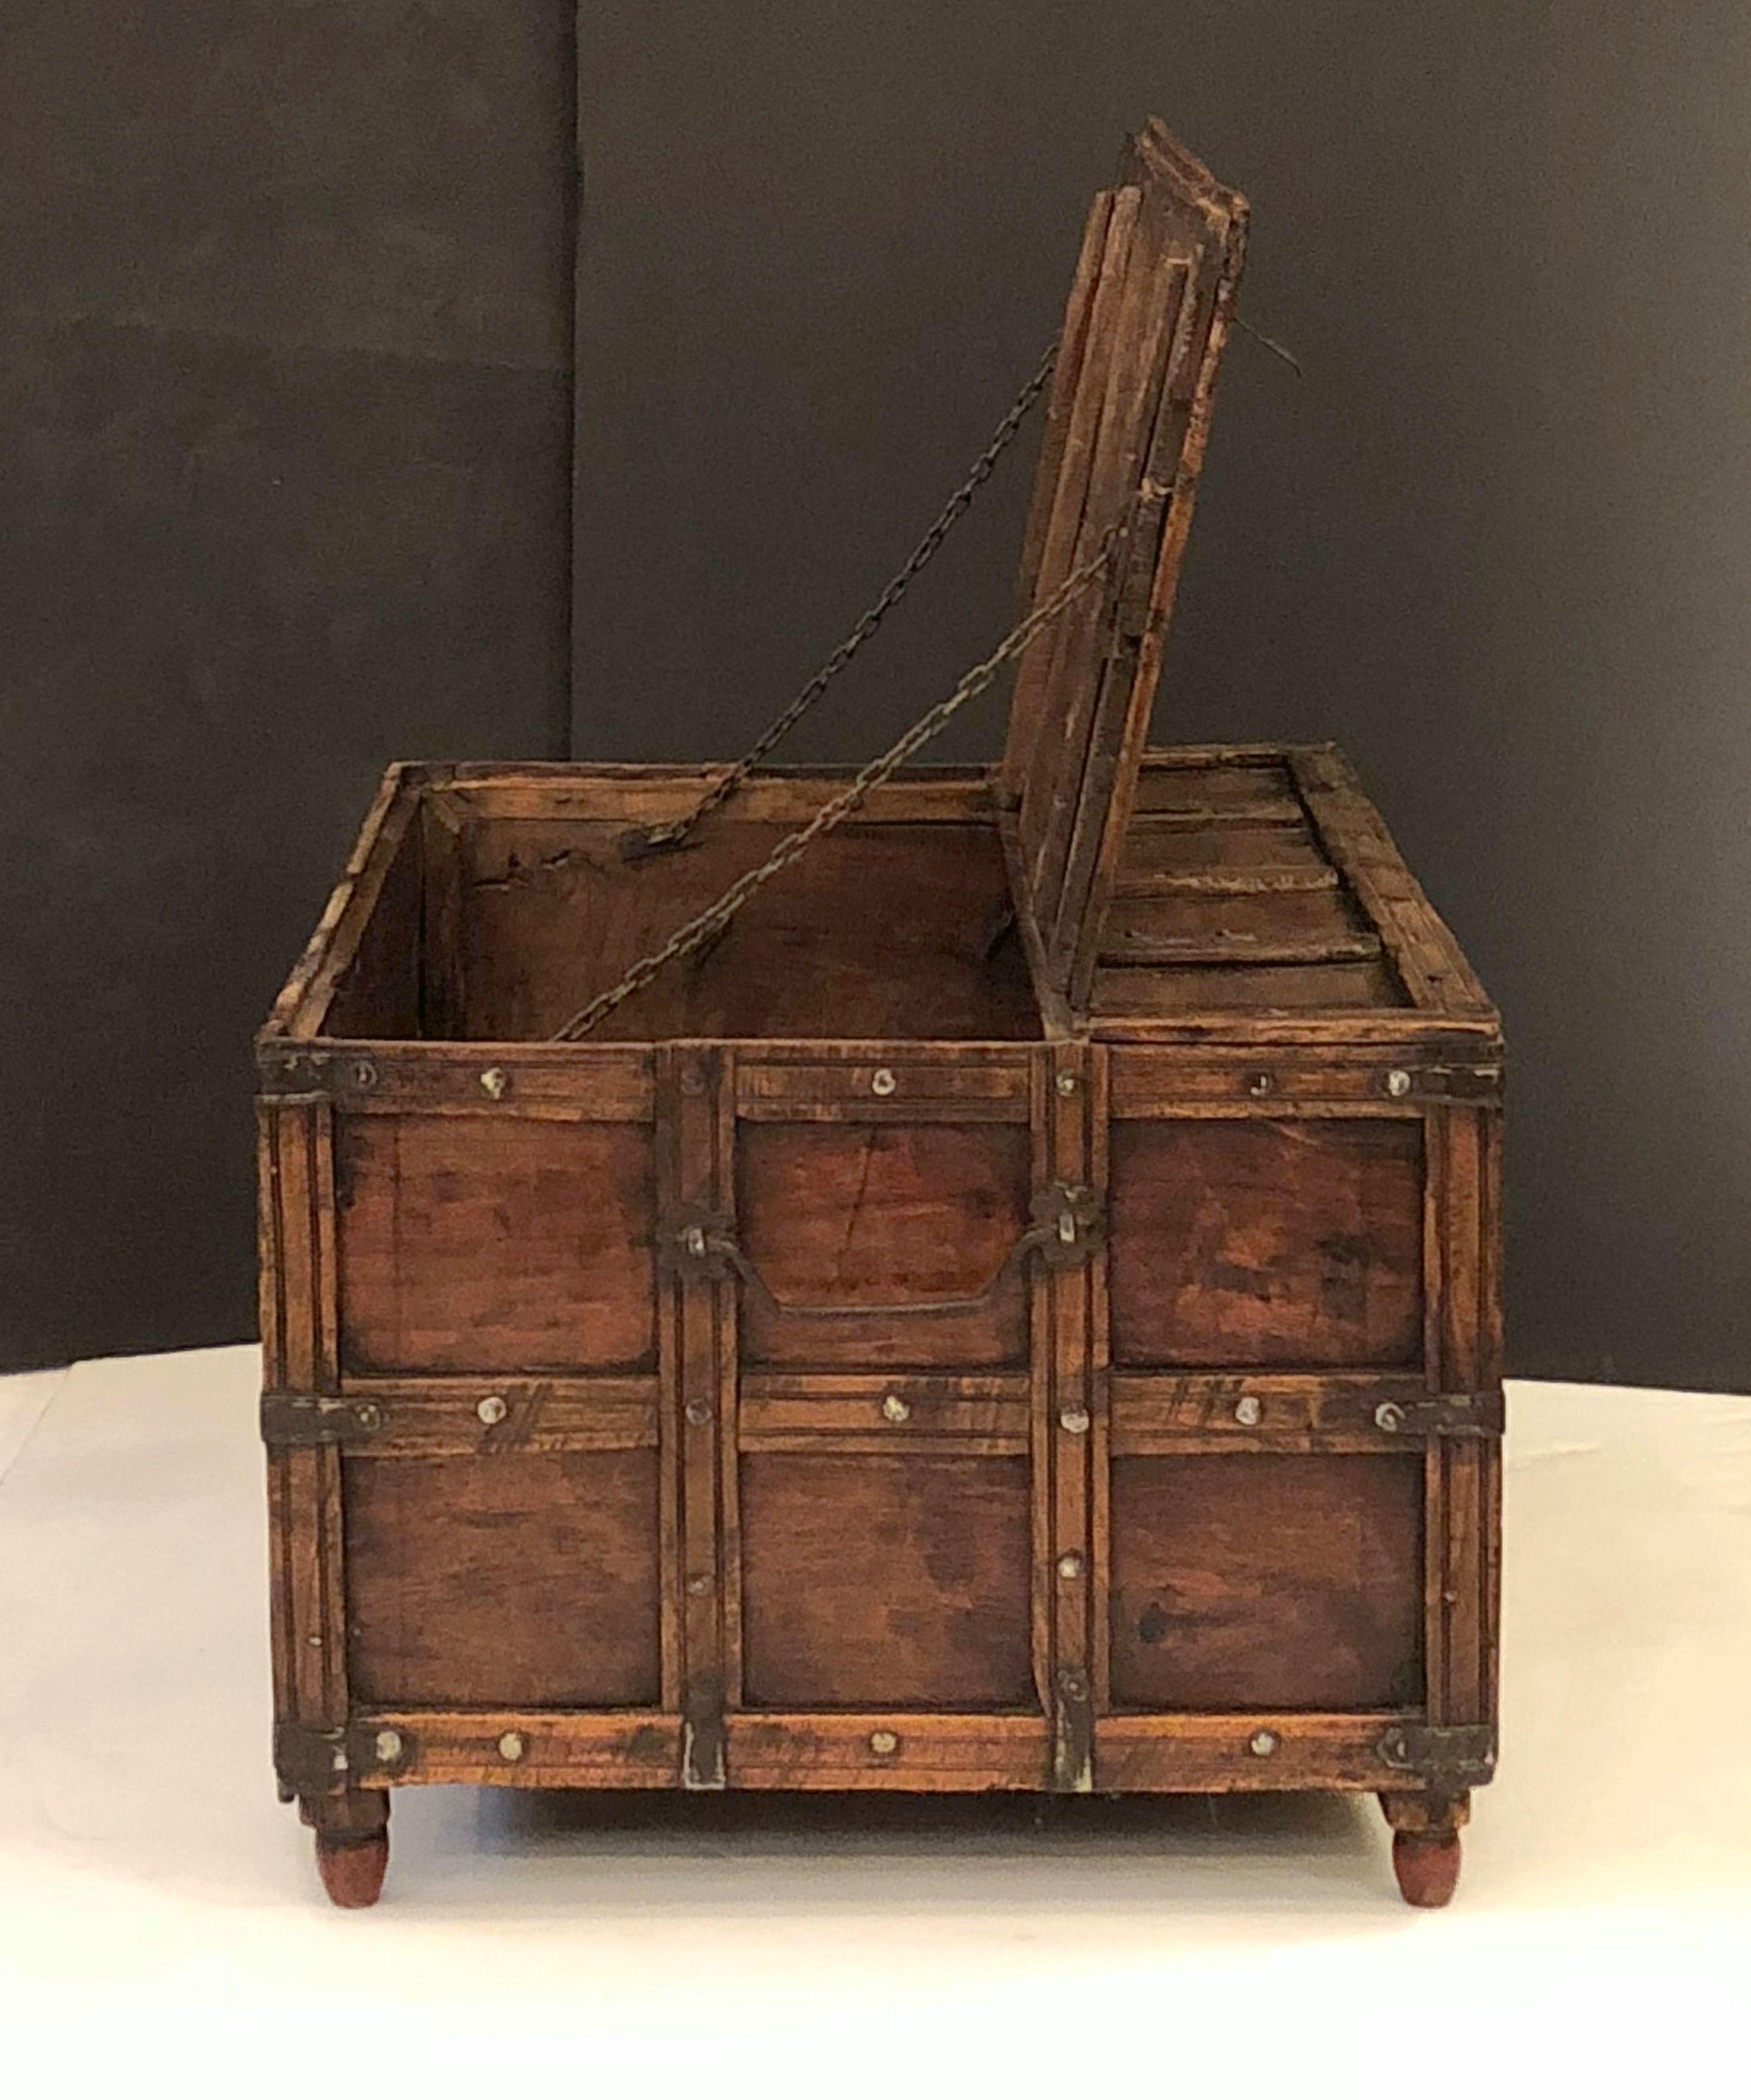 Iron-Bound Stick Box or Trunk from British Colonial India 'The Raj' 4